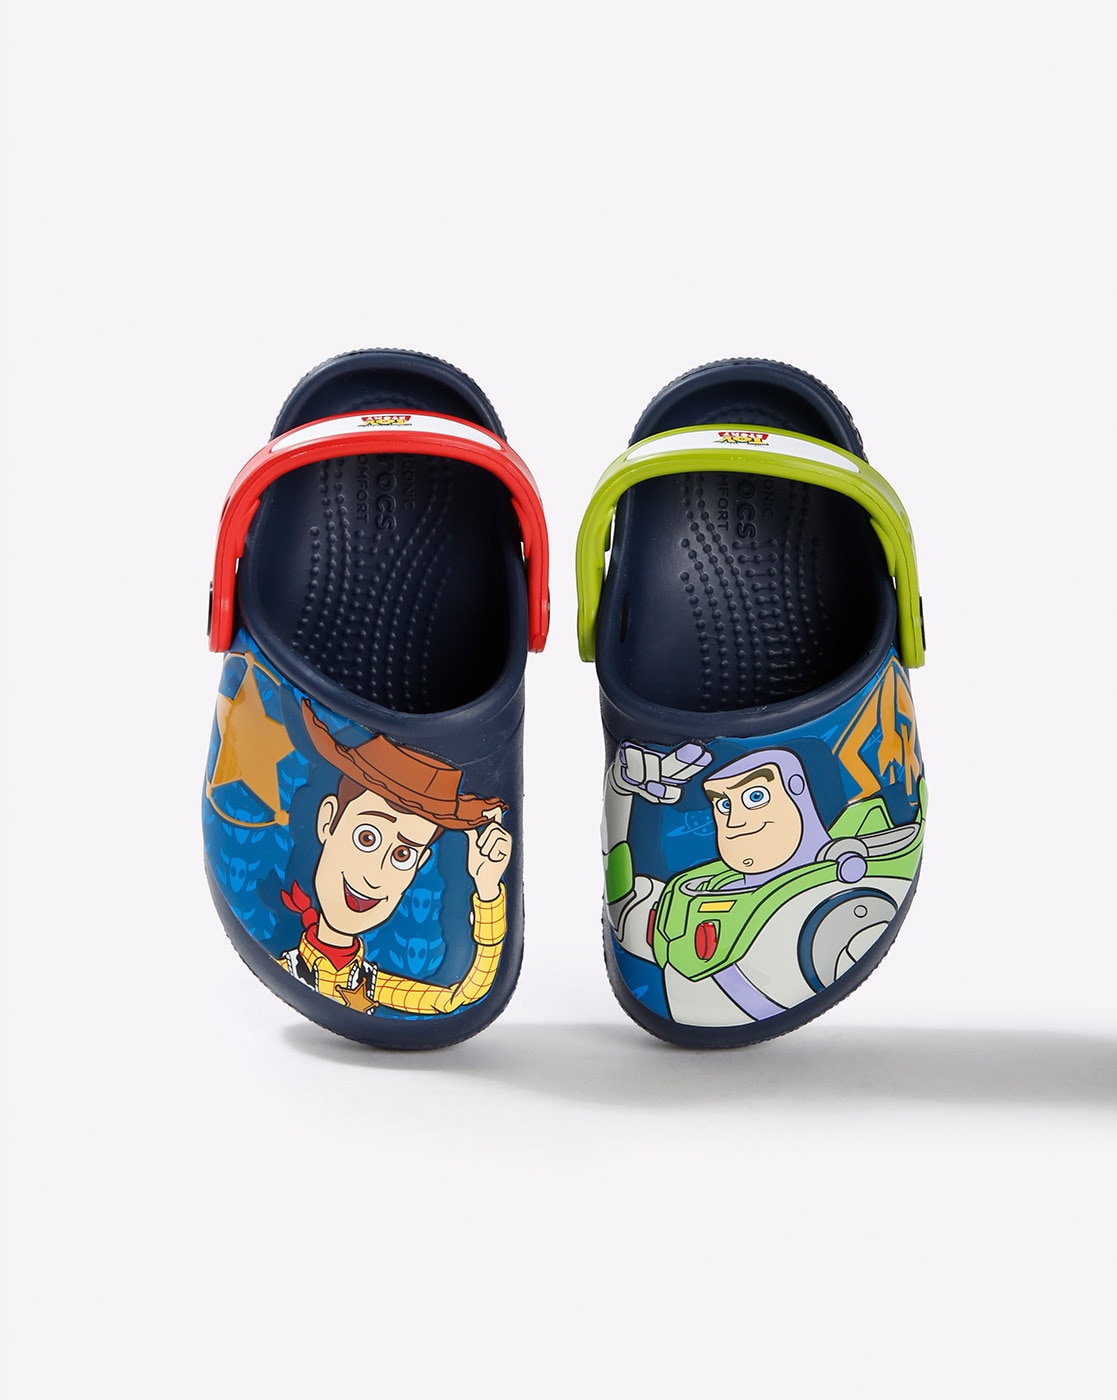 toy story toddler crocs